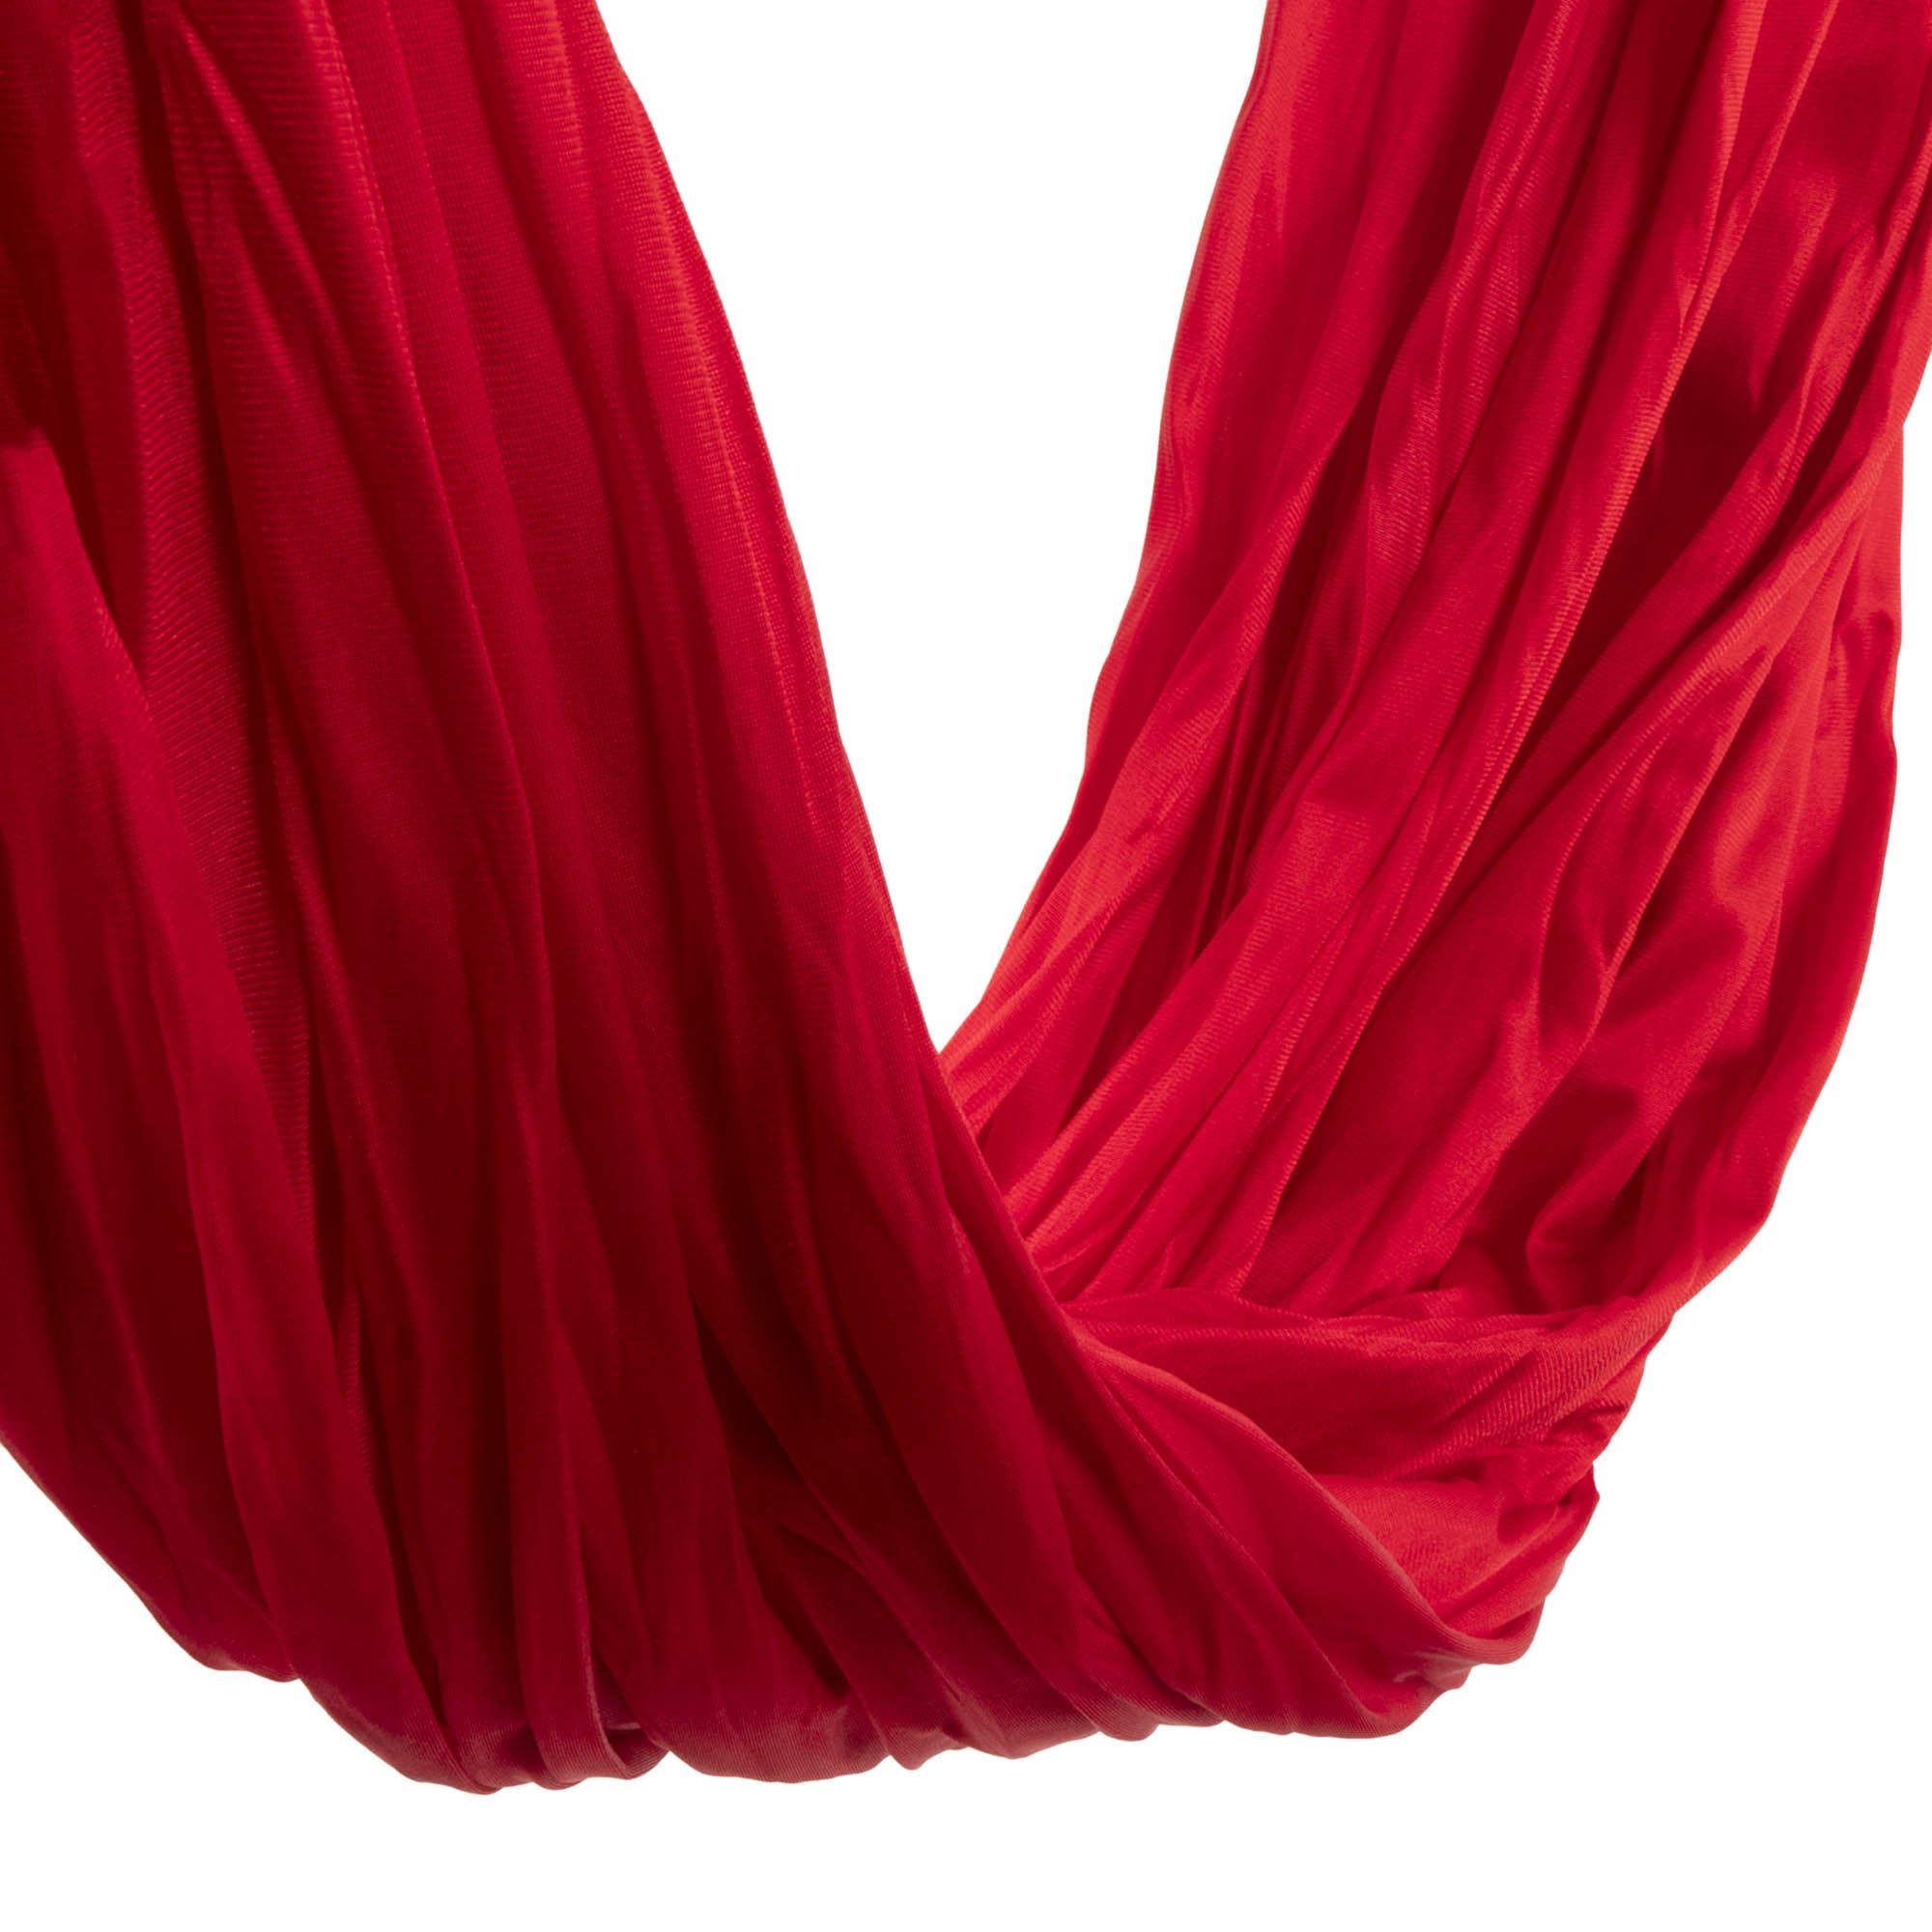 Prodigy 6m aerial yoga hammock in red close up 